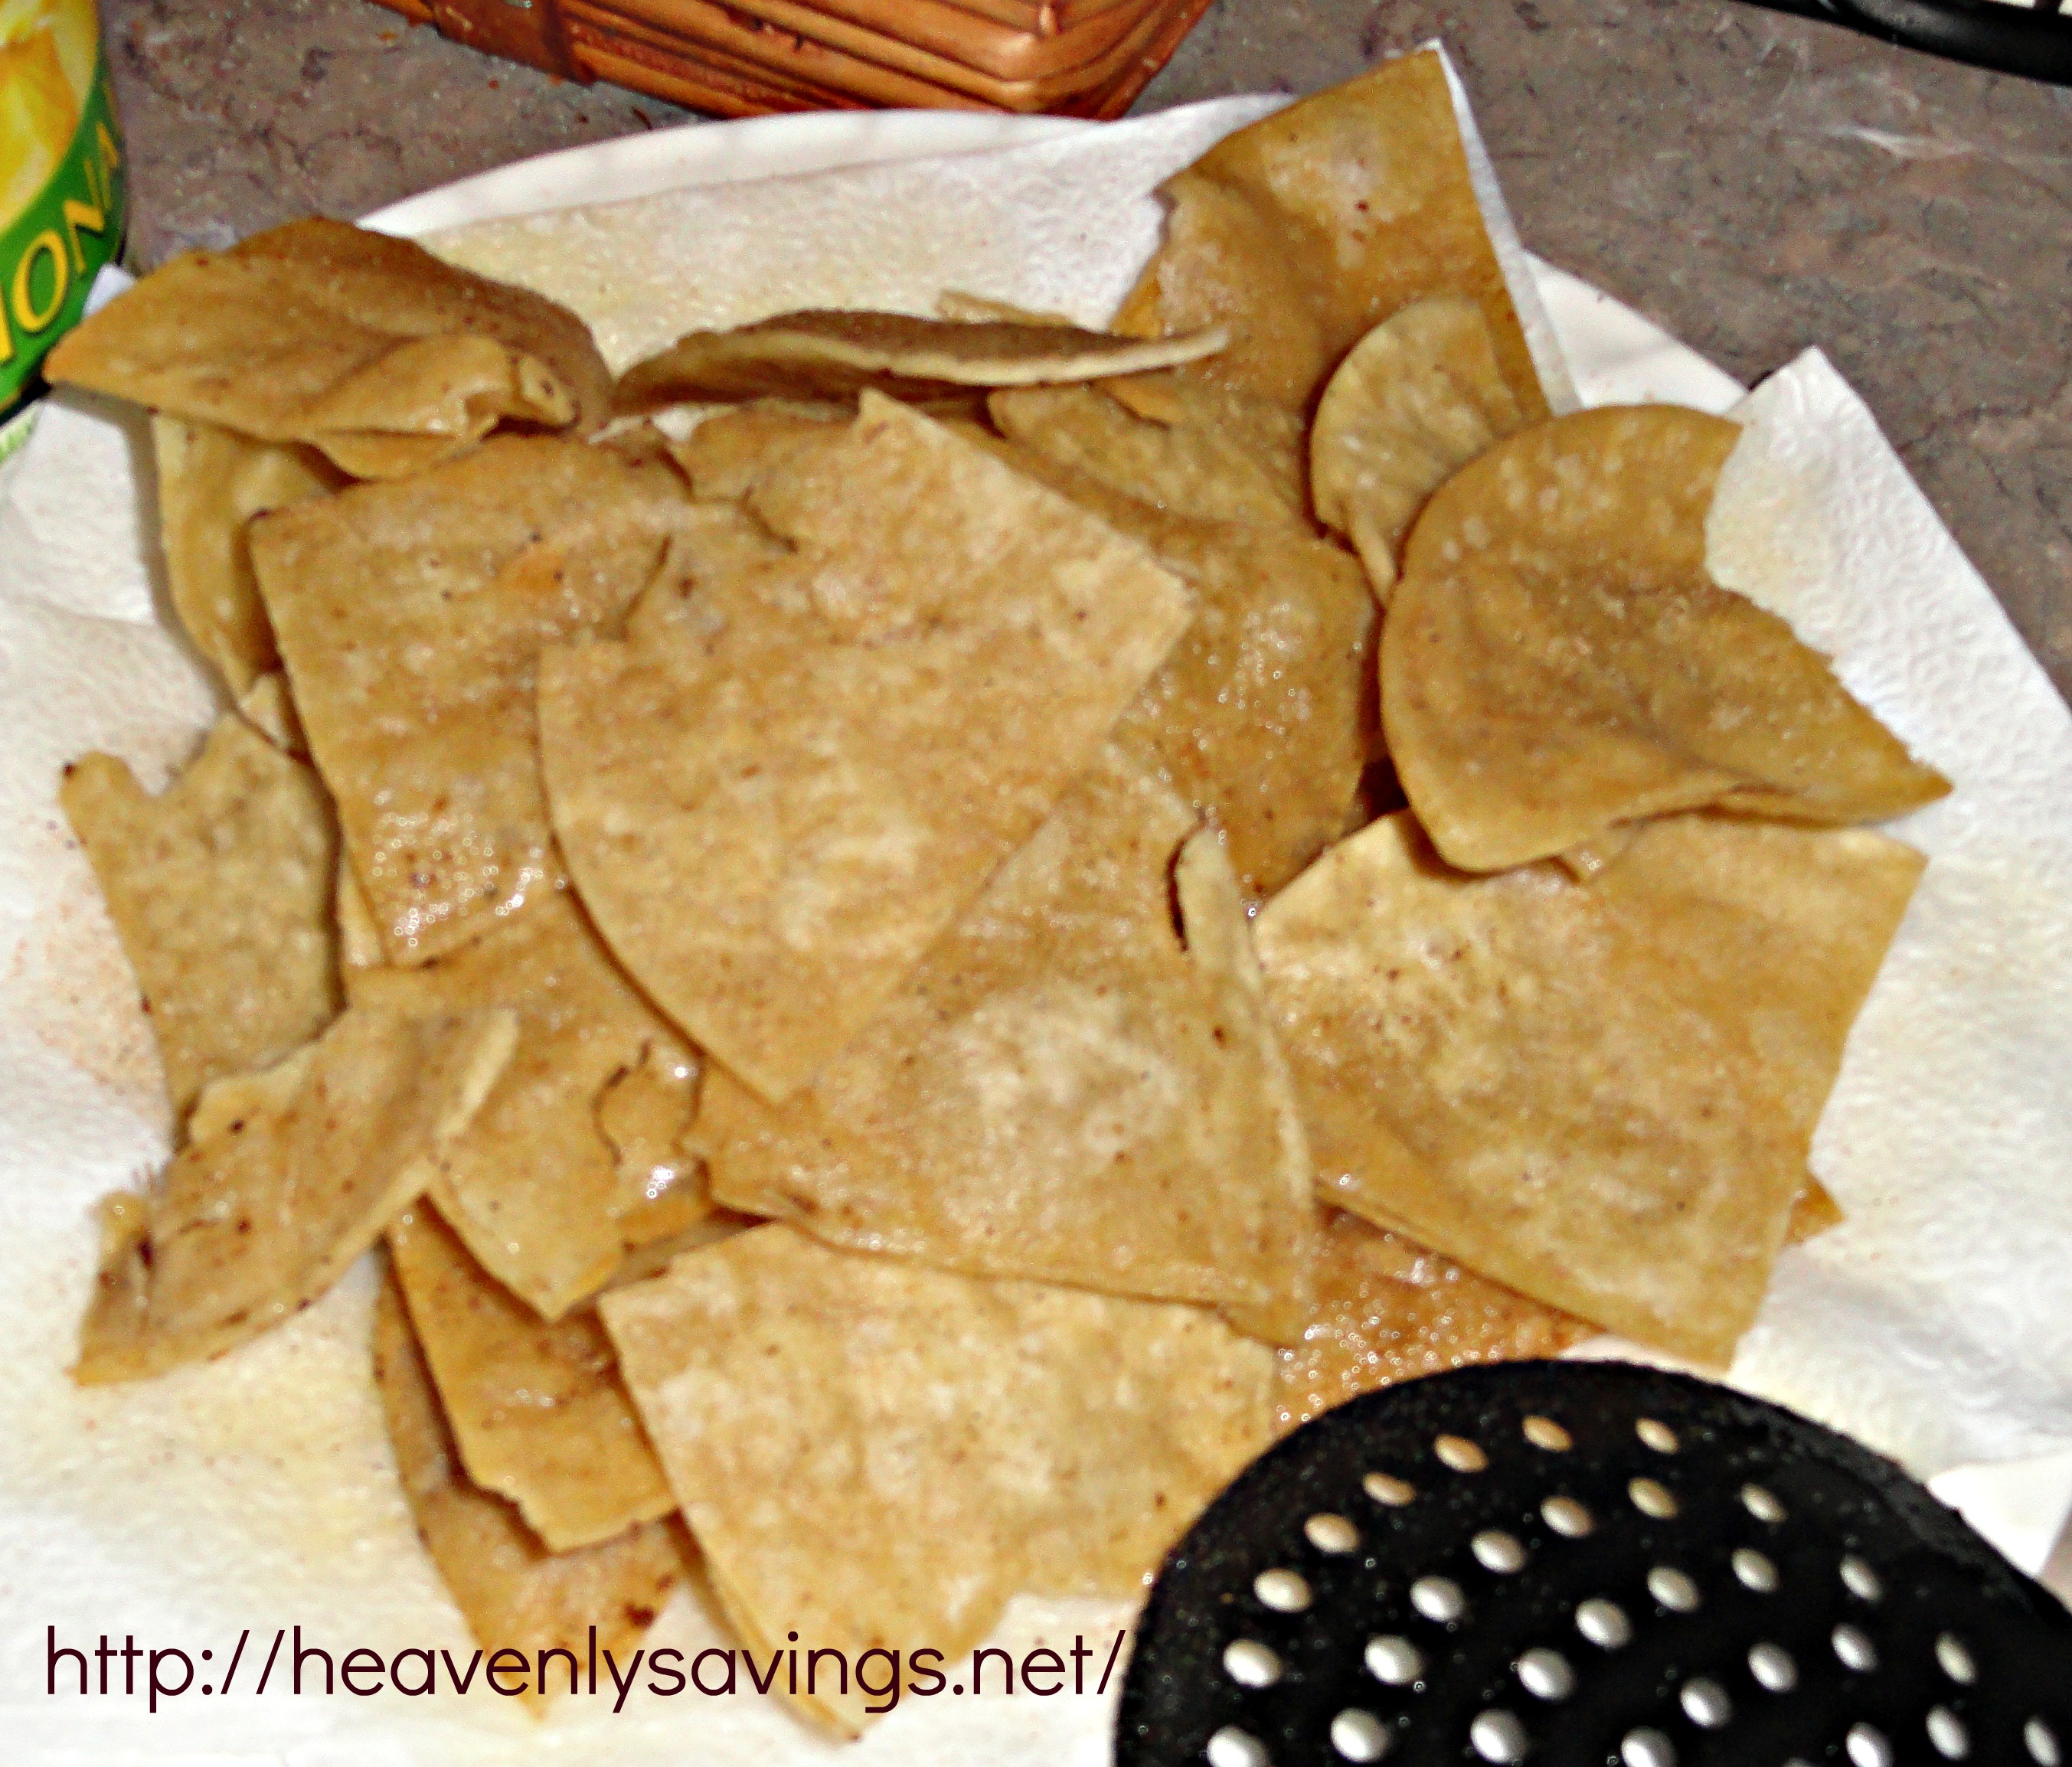 Make your own Tortilla Chips!